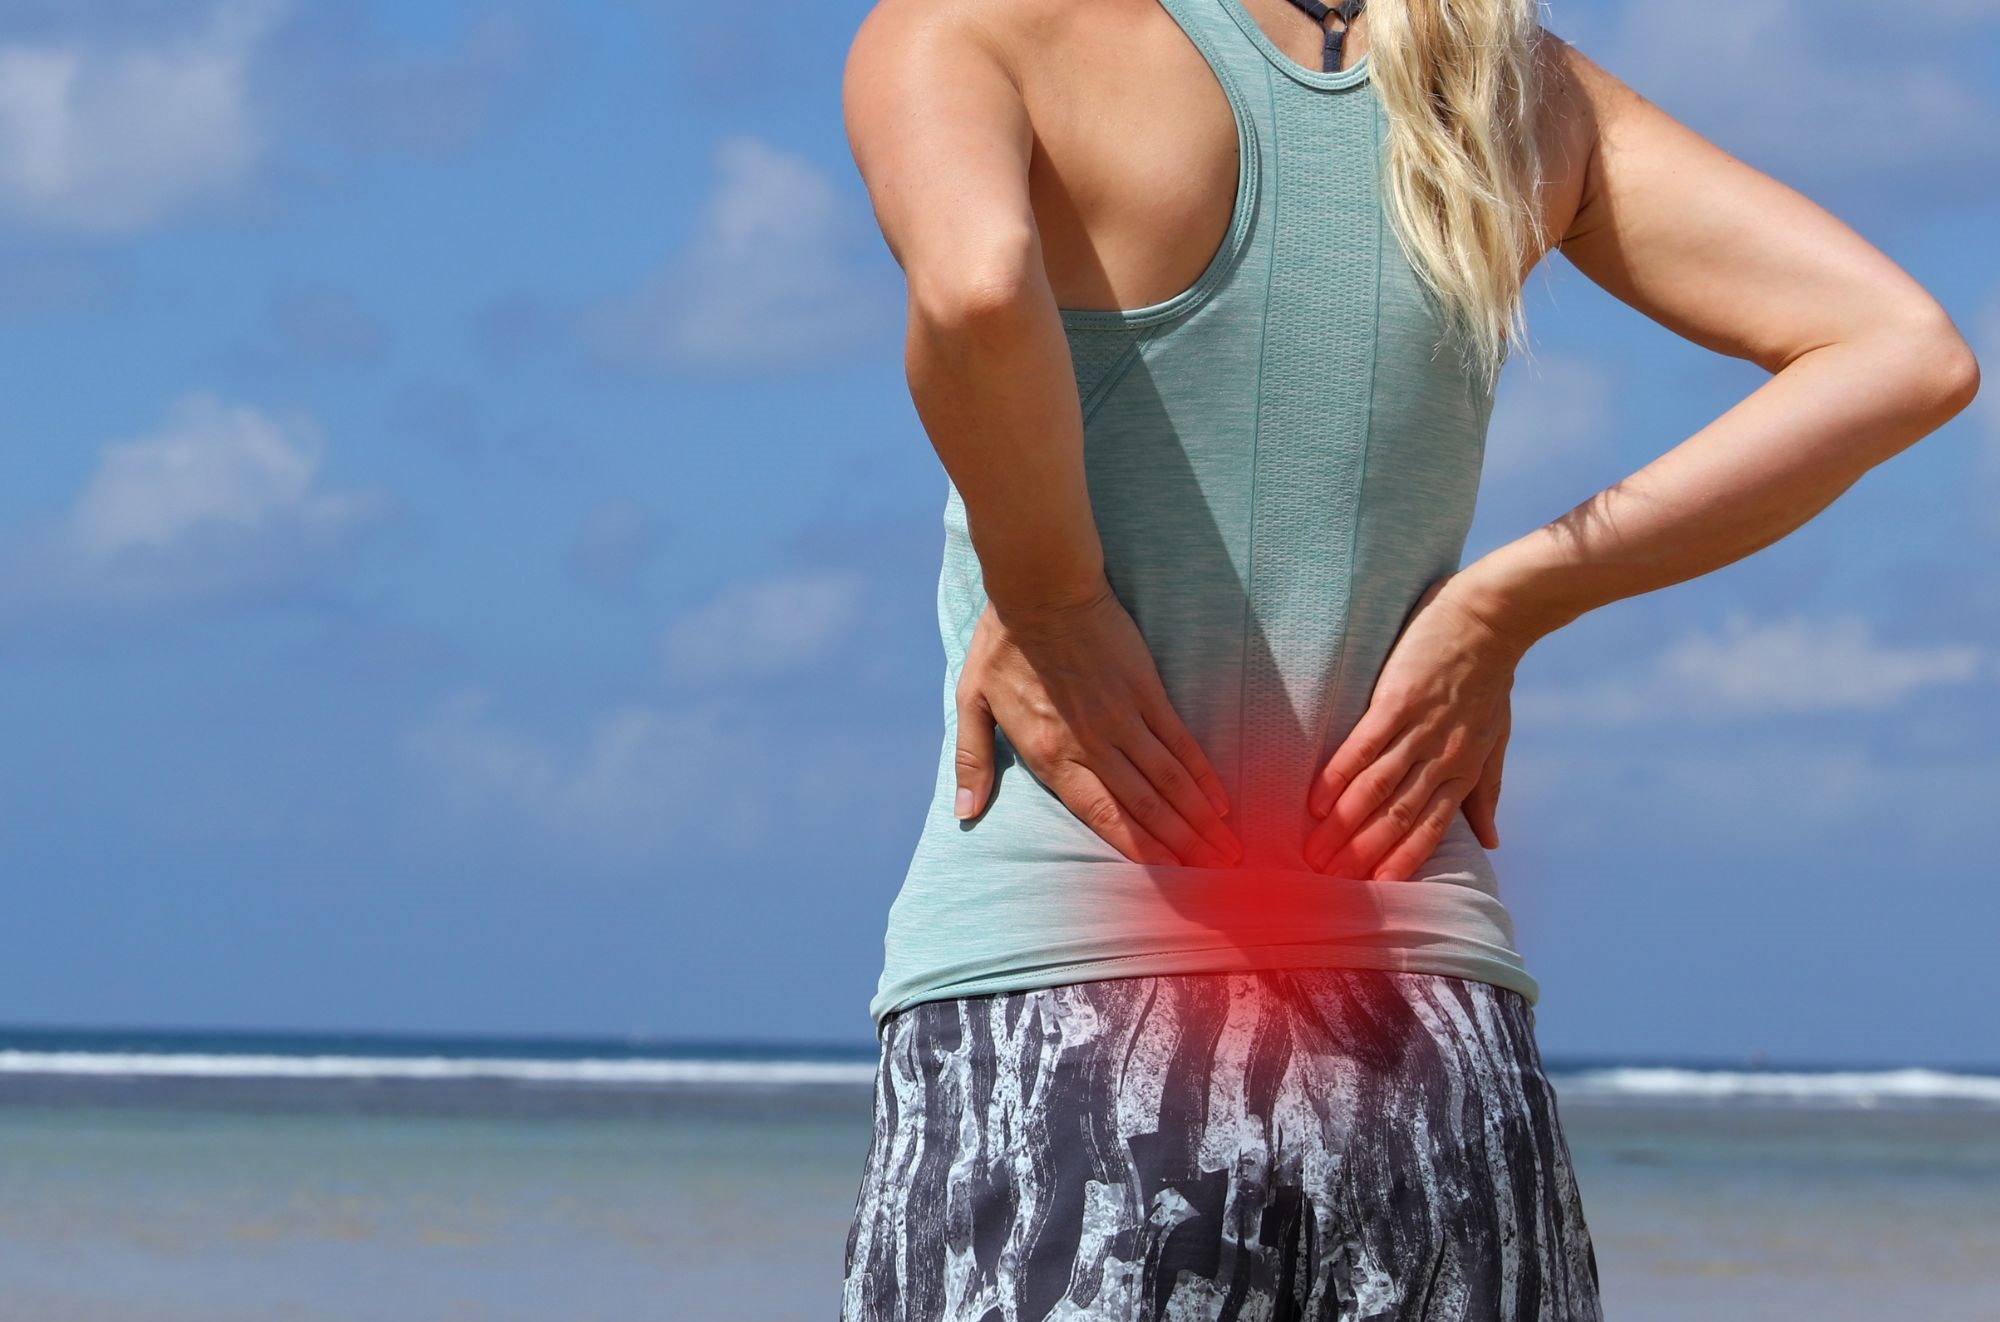 Why Am I Getting Lower Back Pain When Running?